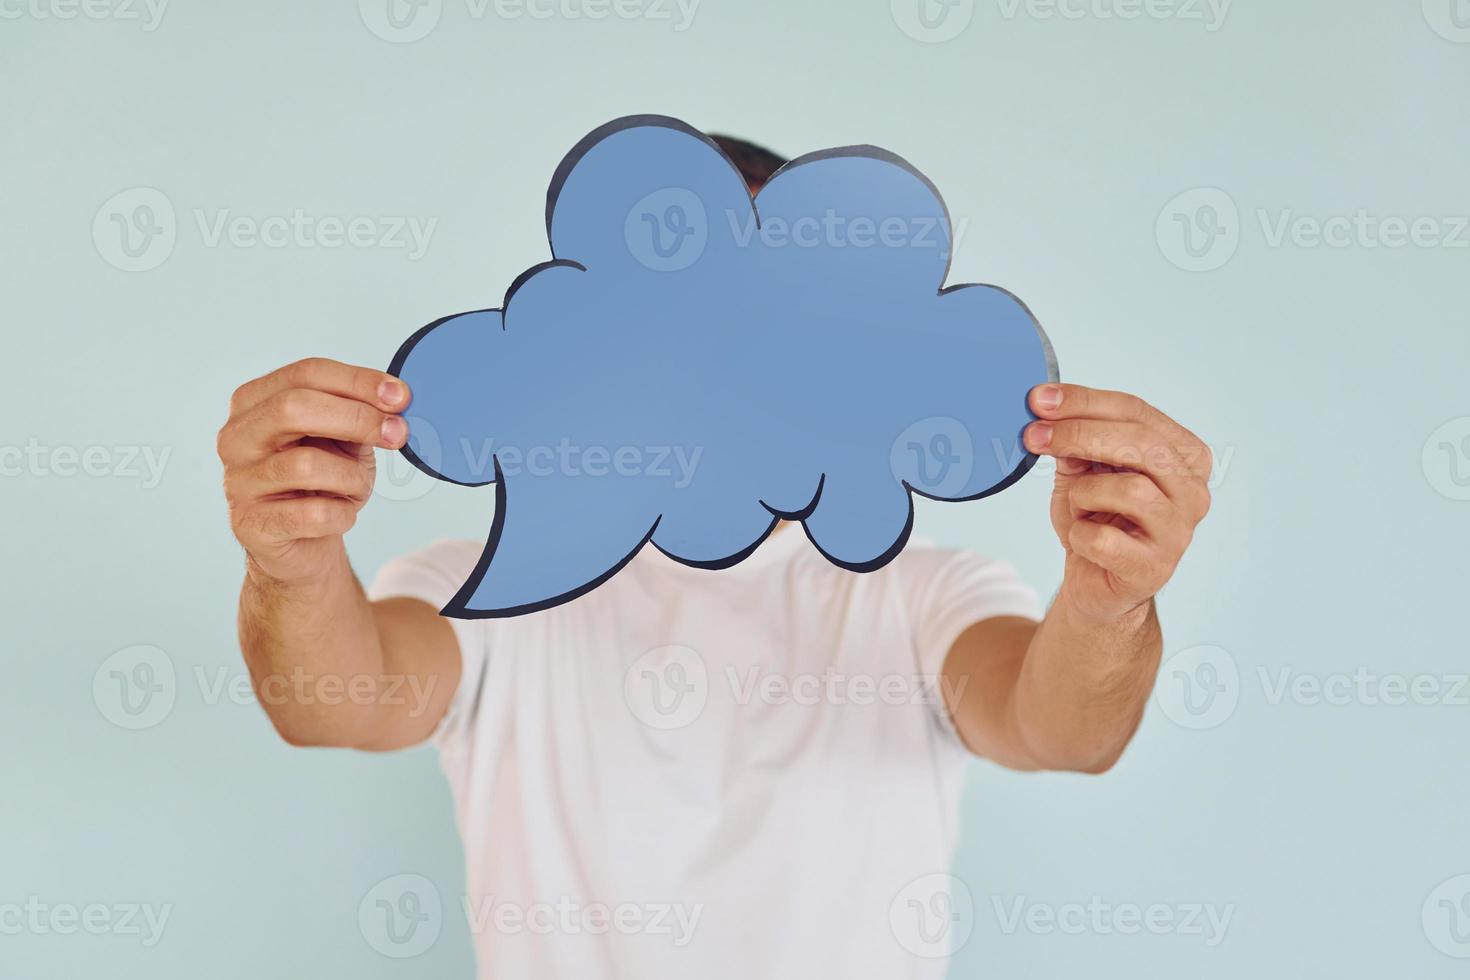 Cloud looking signs. Man standing in the studio photo